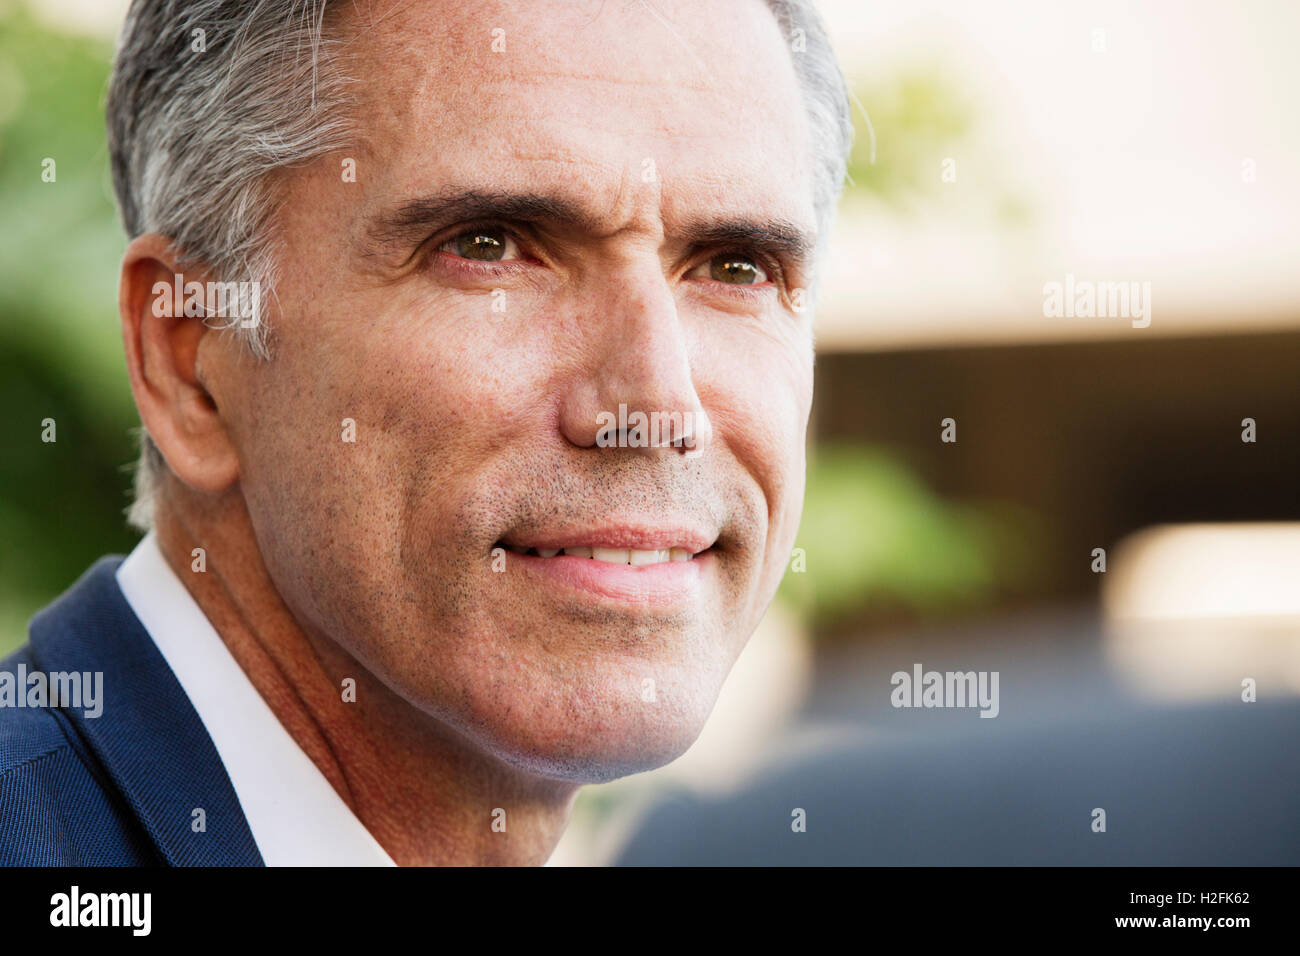 A man in a white shirt with grey hair, smiling, his head turned to speak to another person . Stock Photo